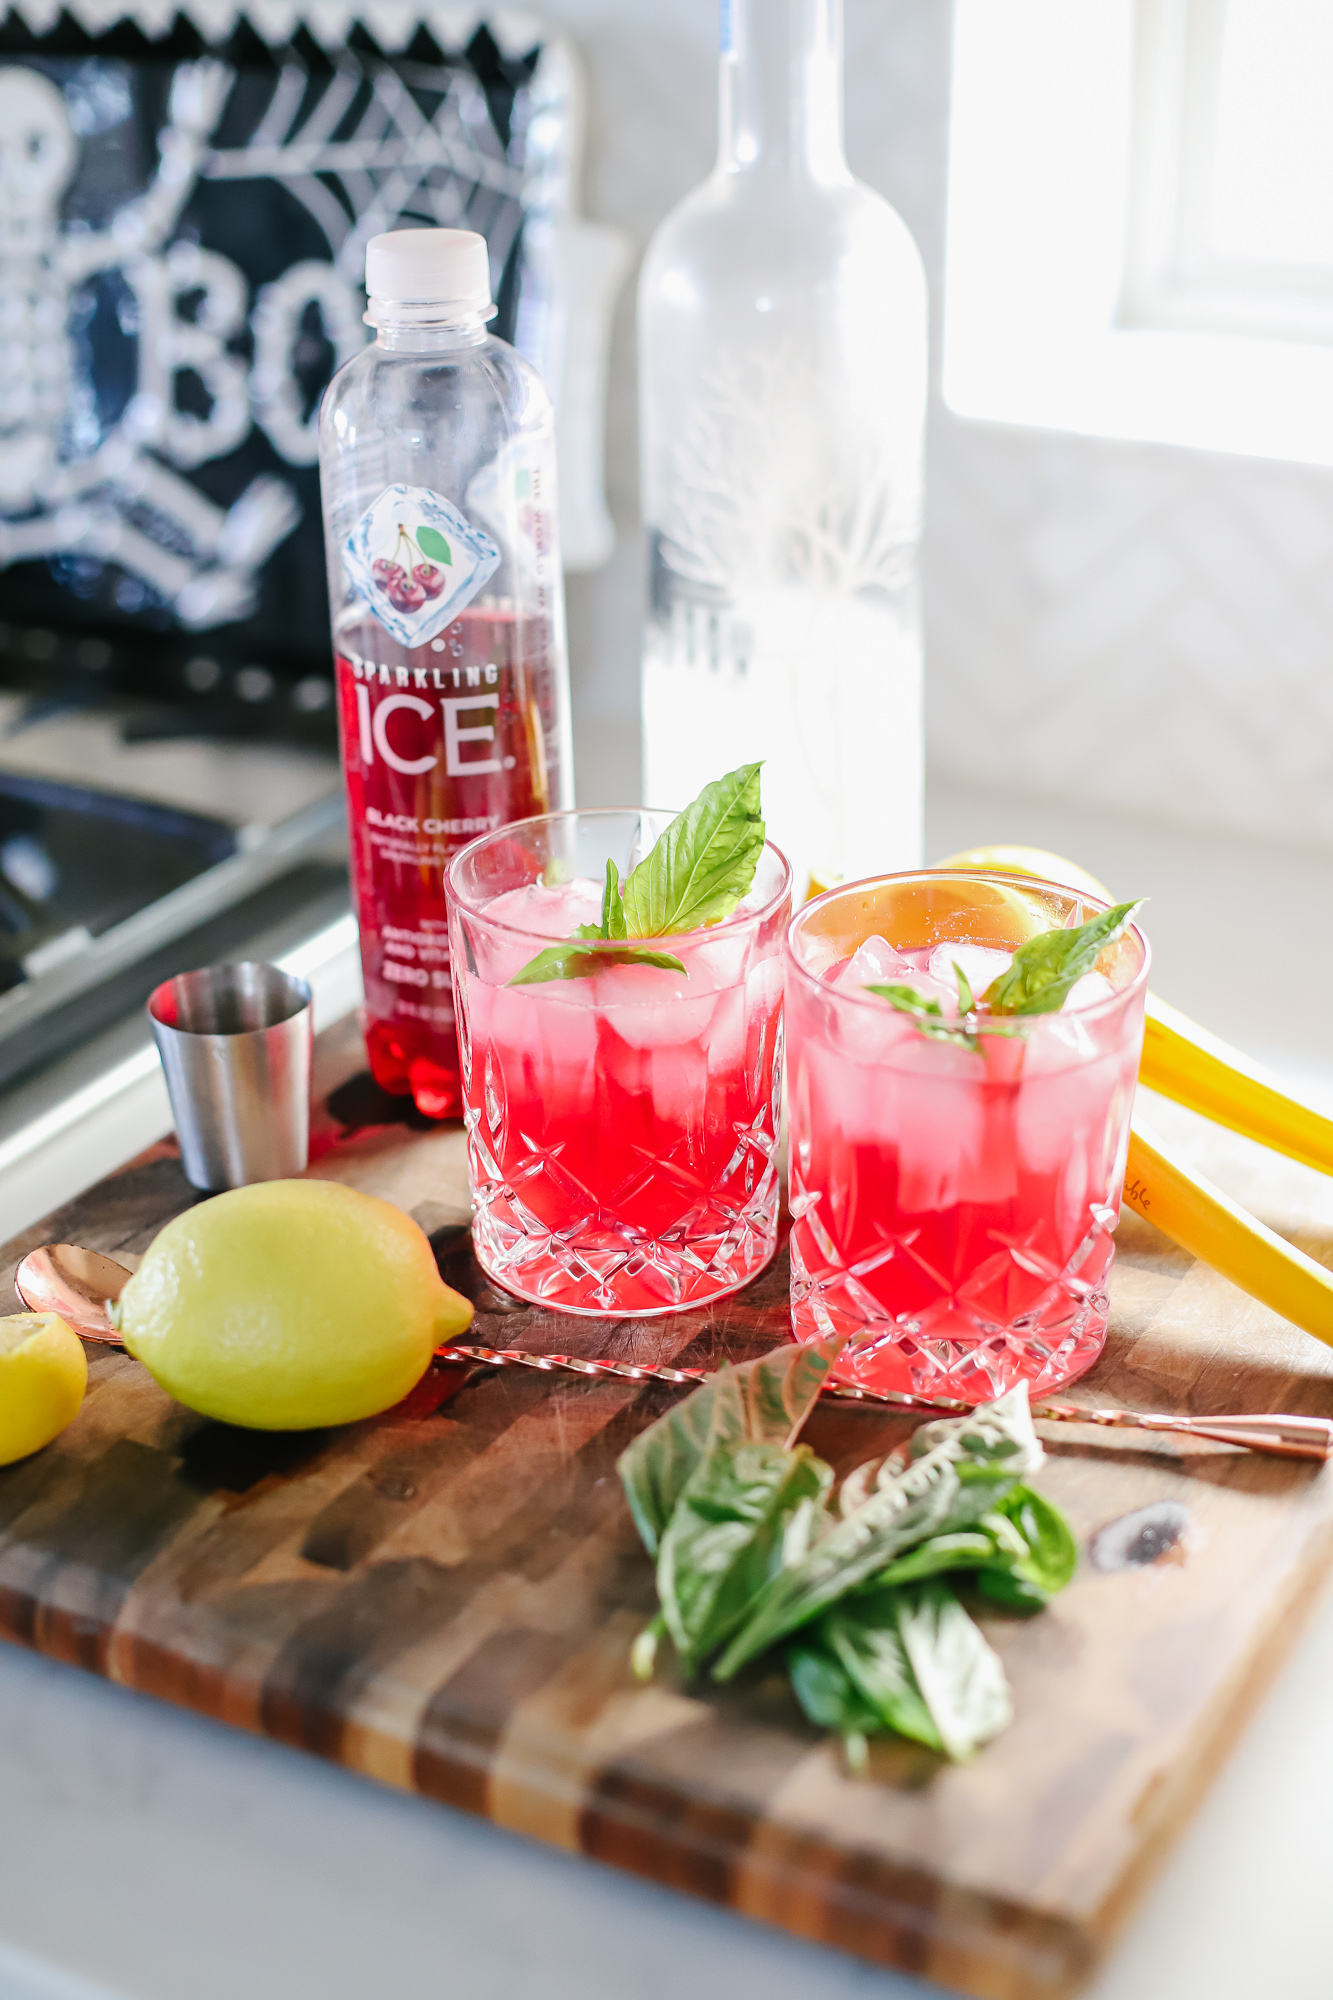 Black Cherry & Basil Spritzer. Keto Party Snacks & Drinks for fall gatherings with Sparkling Ice! #ad #getfizzy #sparklingicelife